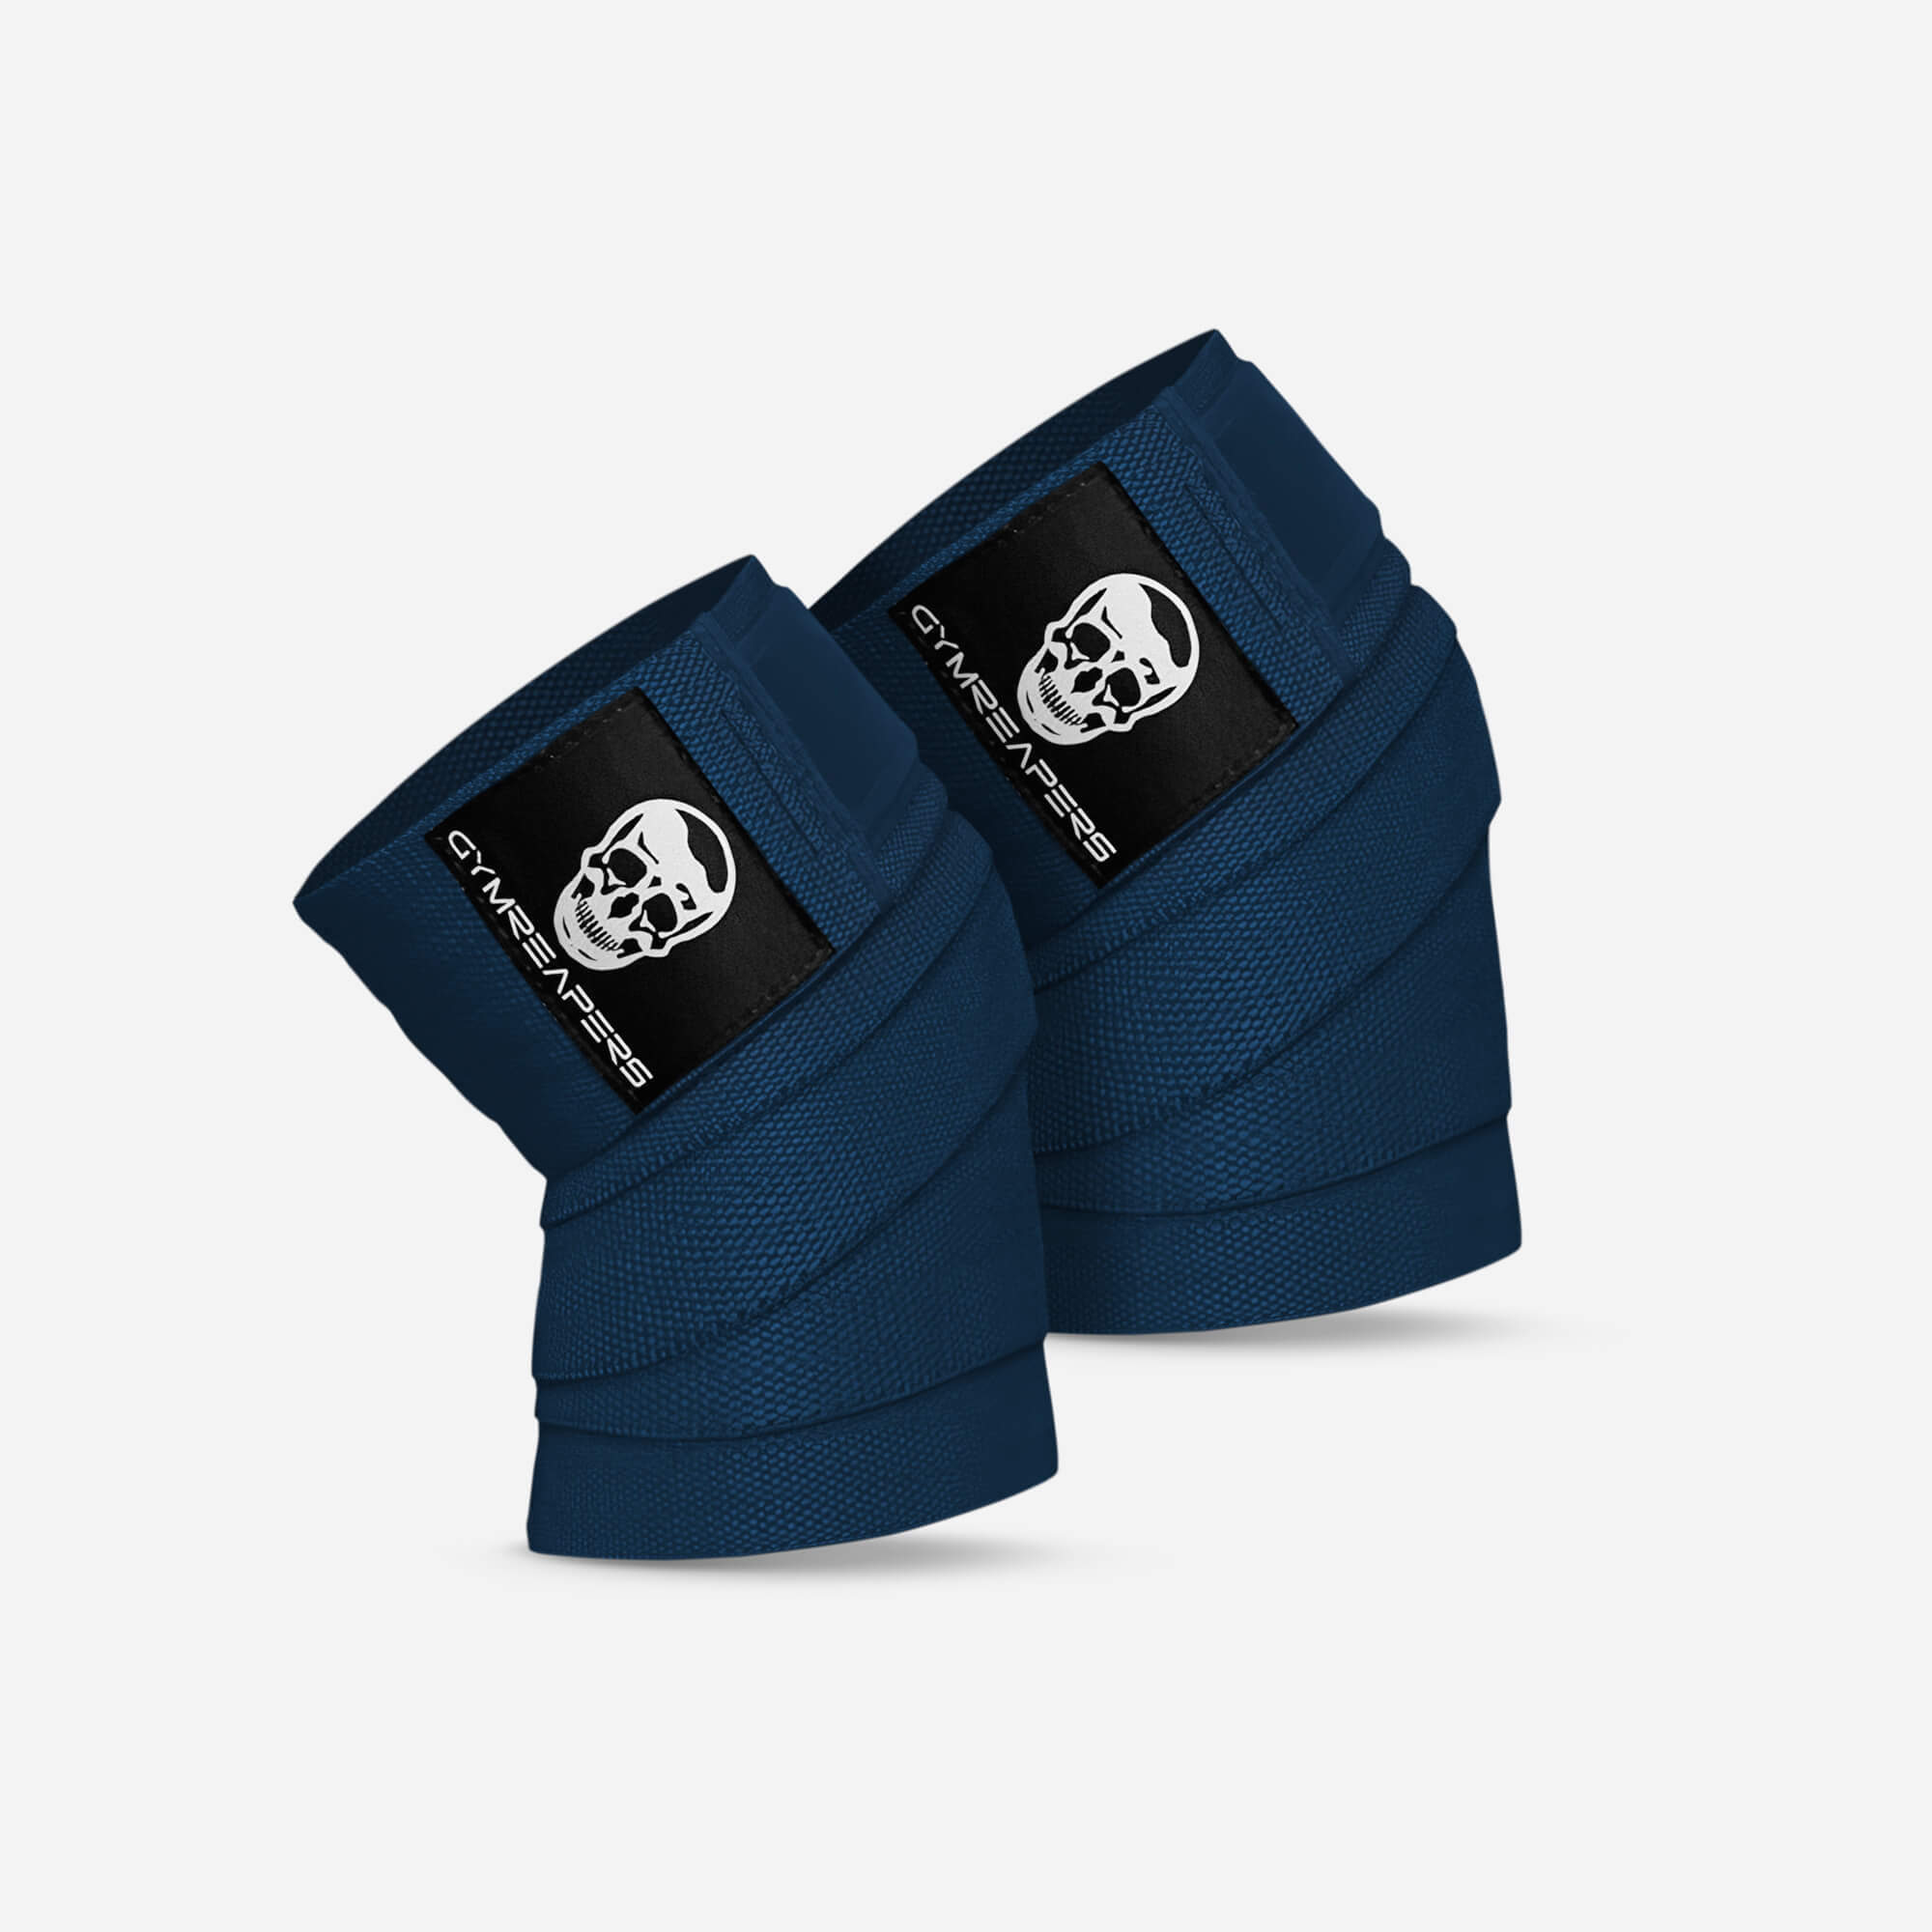 Knee Sleeves & Knee Wraps for Training